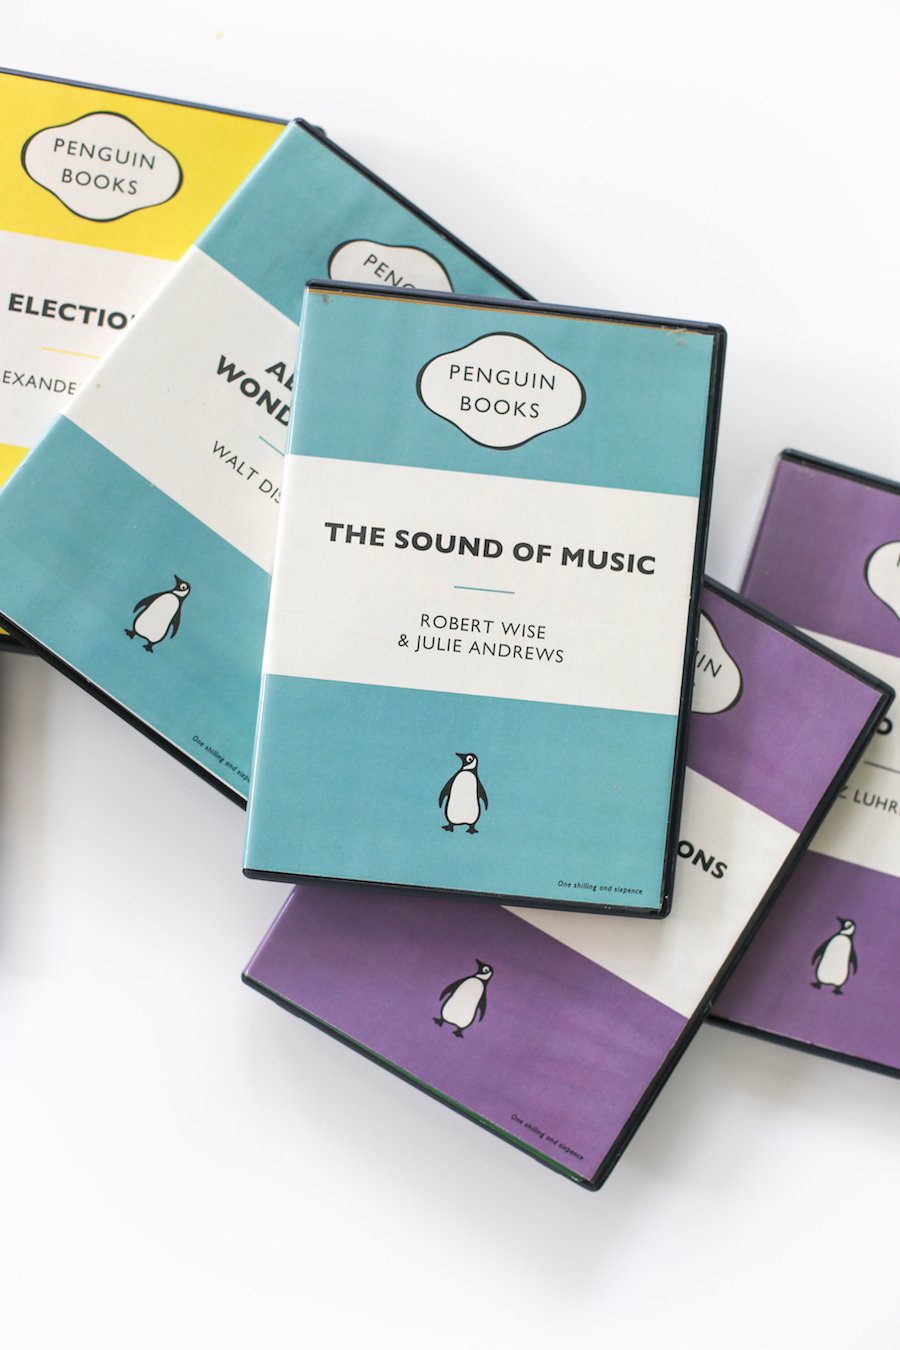 DIY Penguin Book DVD Covers with Free Download // Salty Canary 